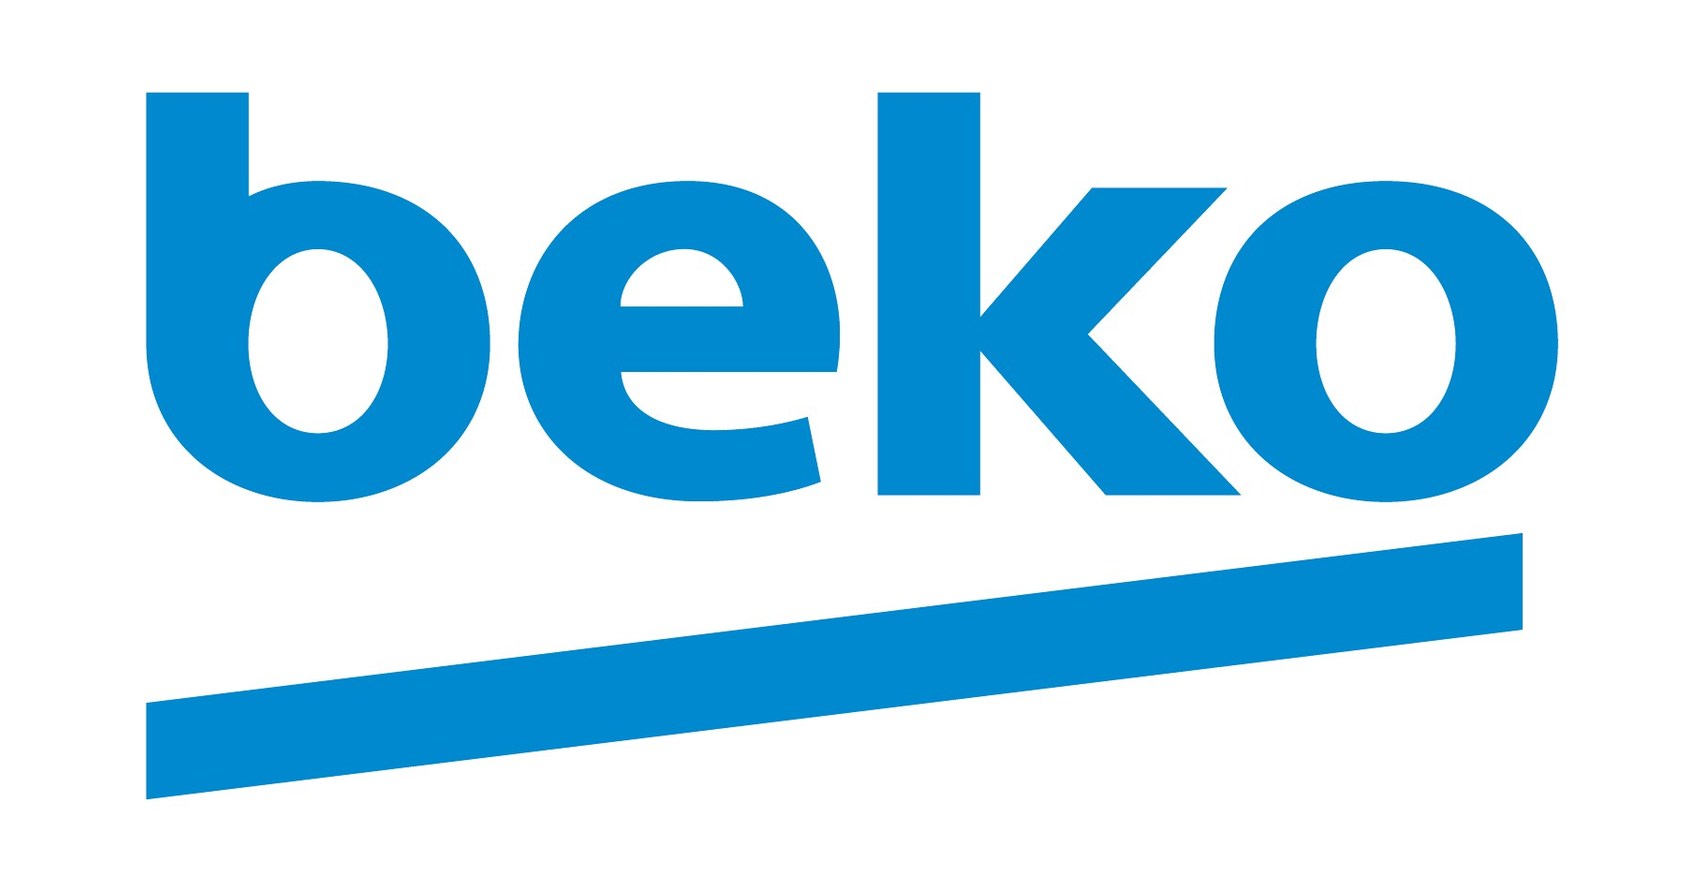 BEKO LAUNCHES THE WASHTUB AND DISHWASHERS THAT WORLD\'S WATER CLEAN ENTIRE FIRST LESS THE ENERGY USING